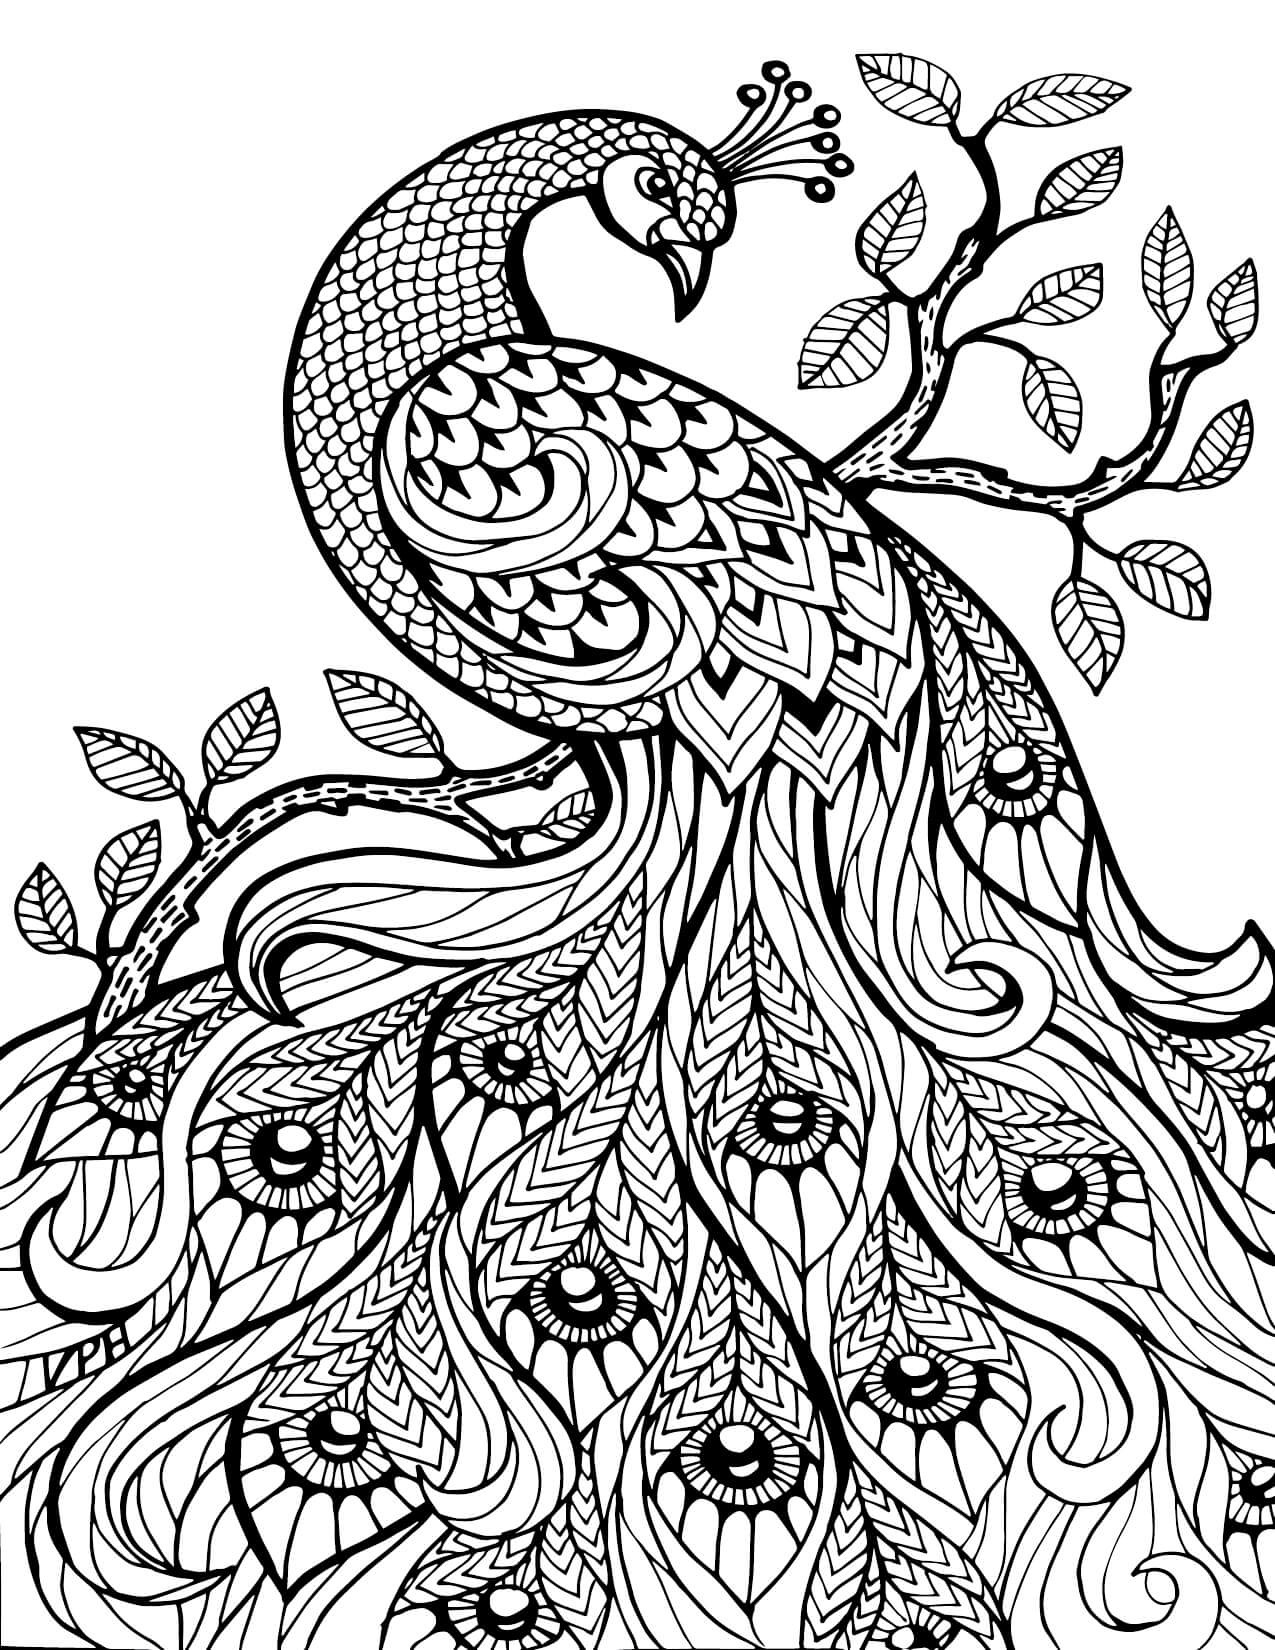 Coloring Pages For Adults Difficult Animals
 Coloring Pages For Adults Difficult Animals 57